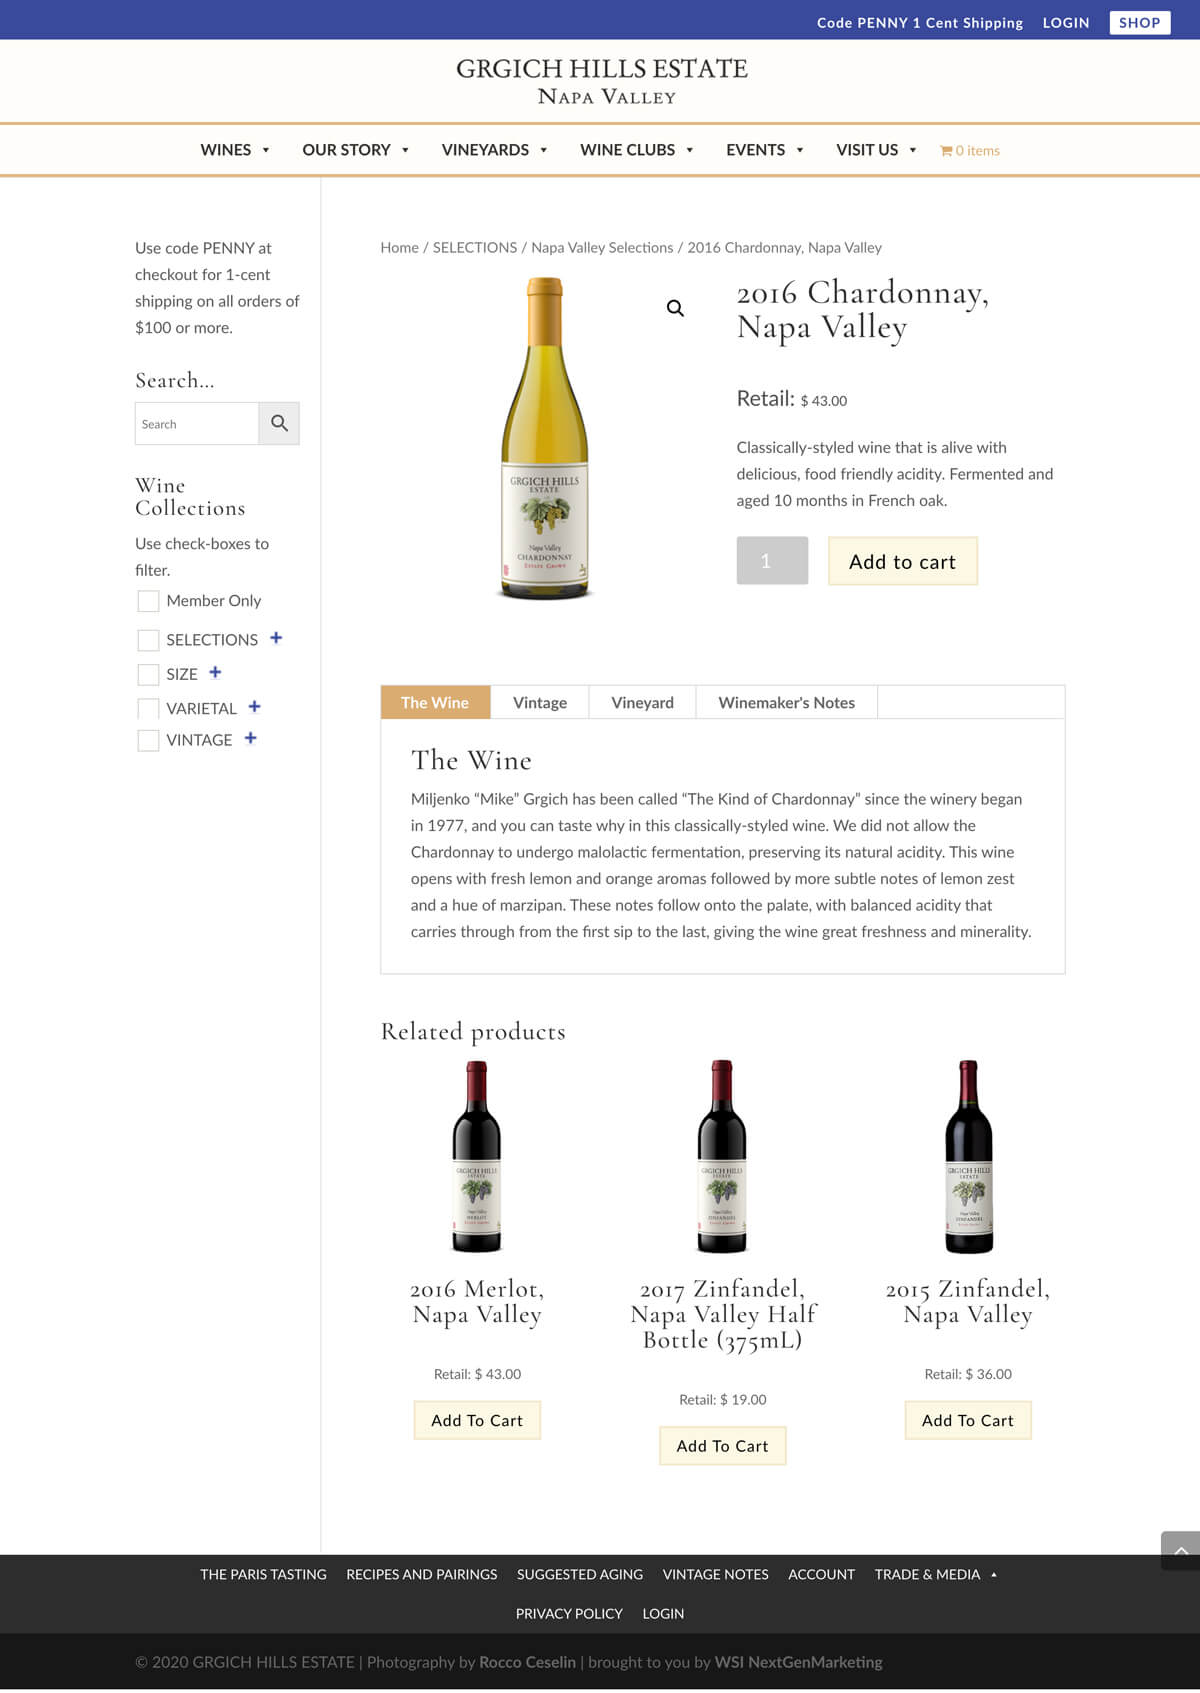 grgich-hills-product-page-ecommerce-winery-website-design